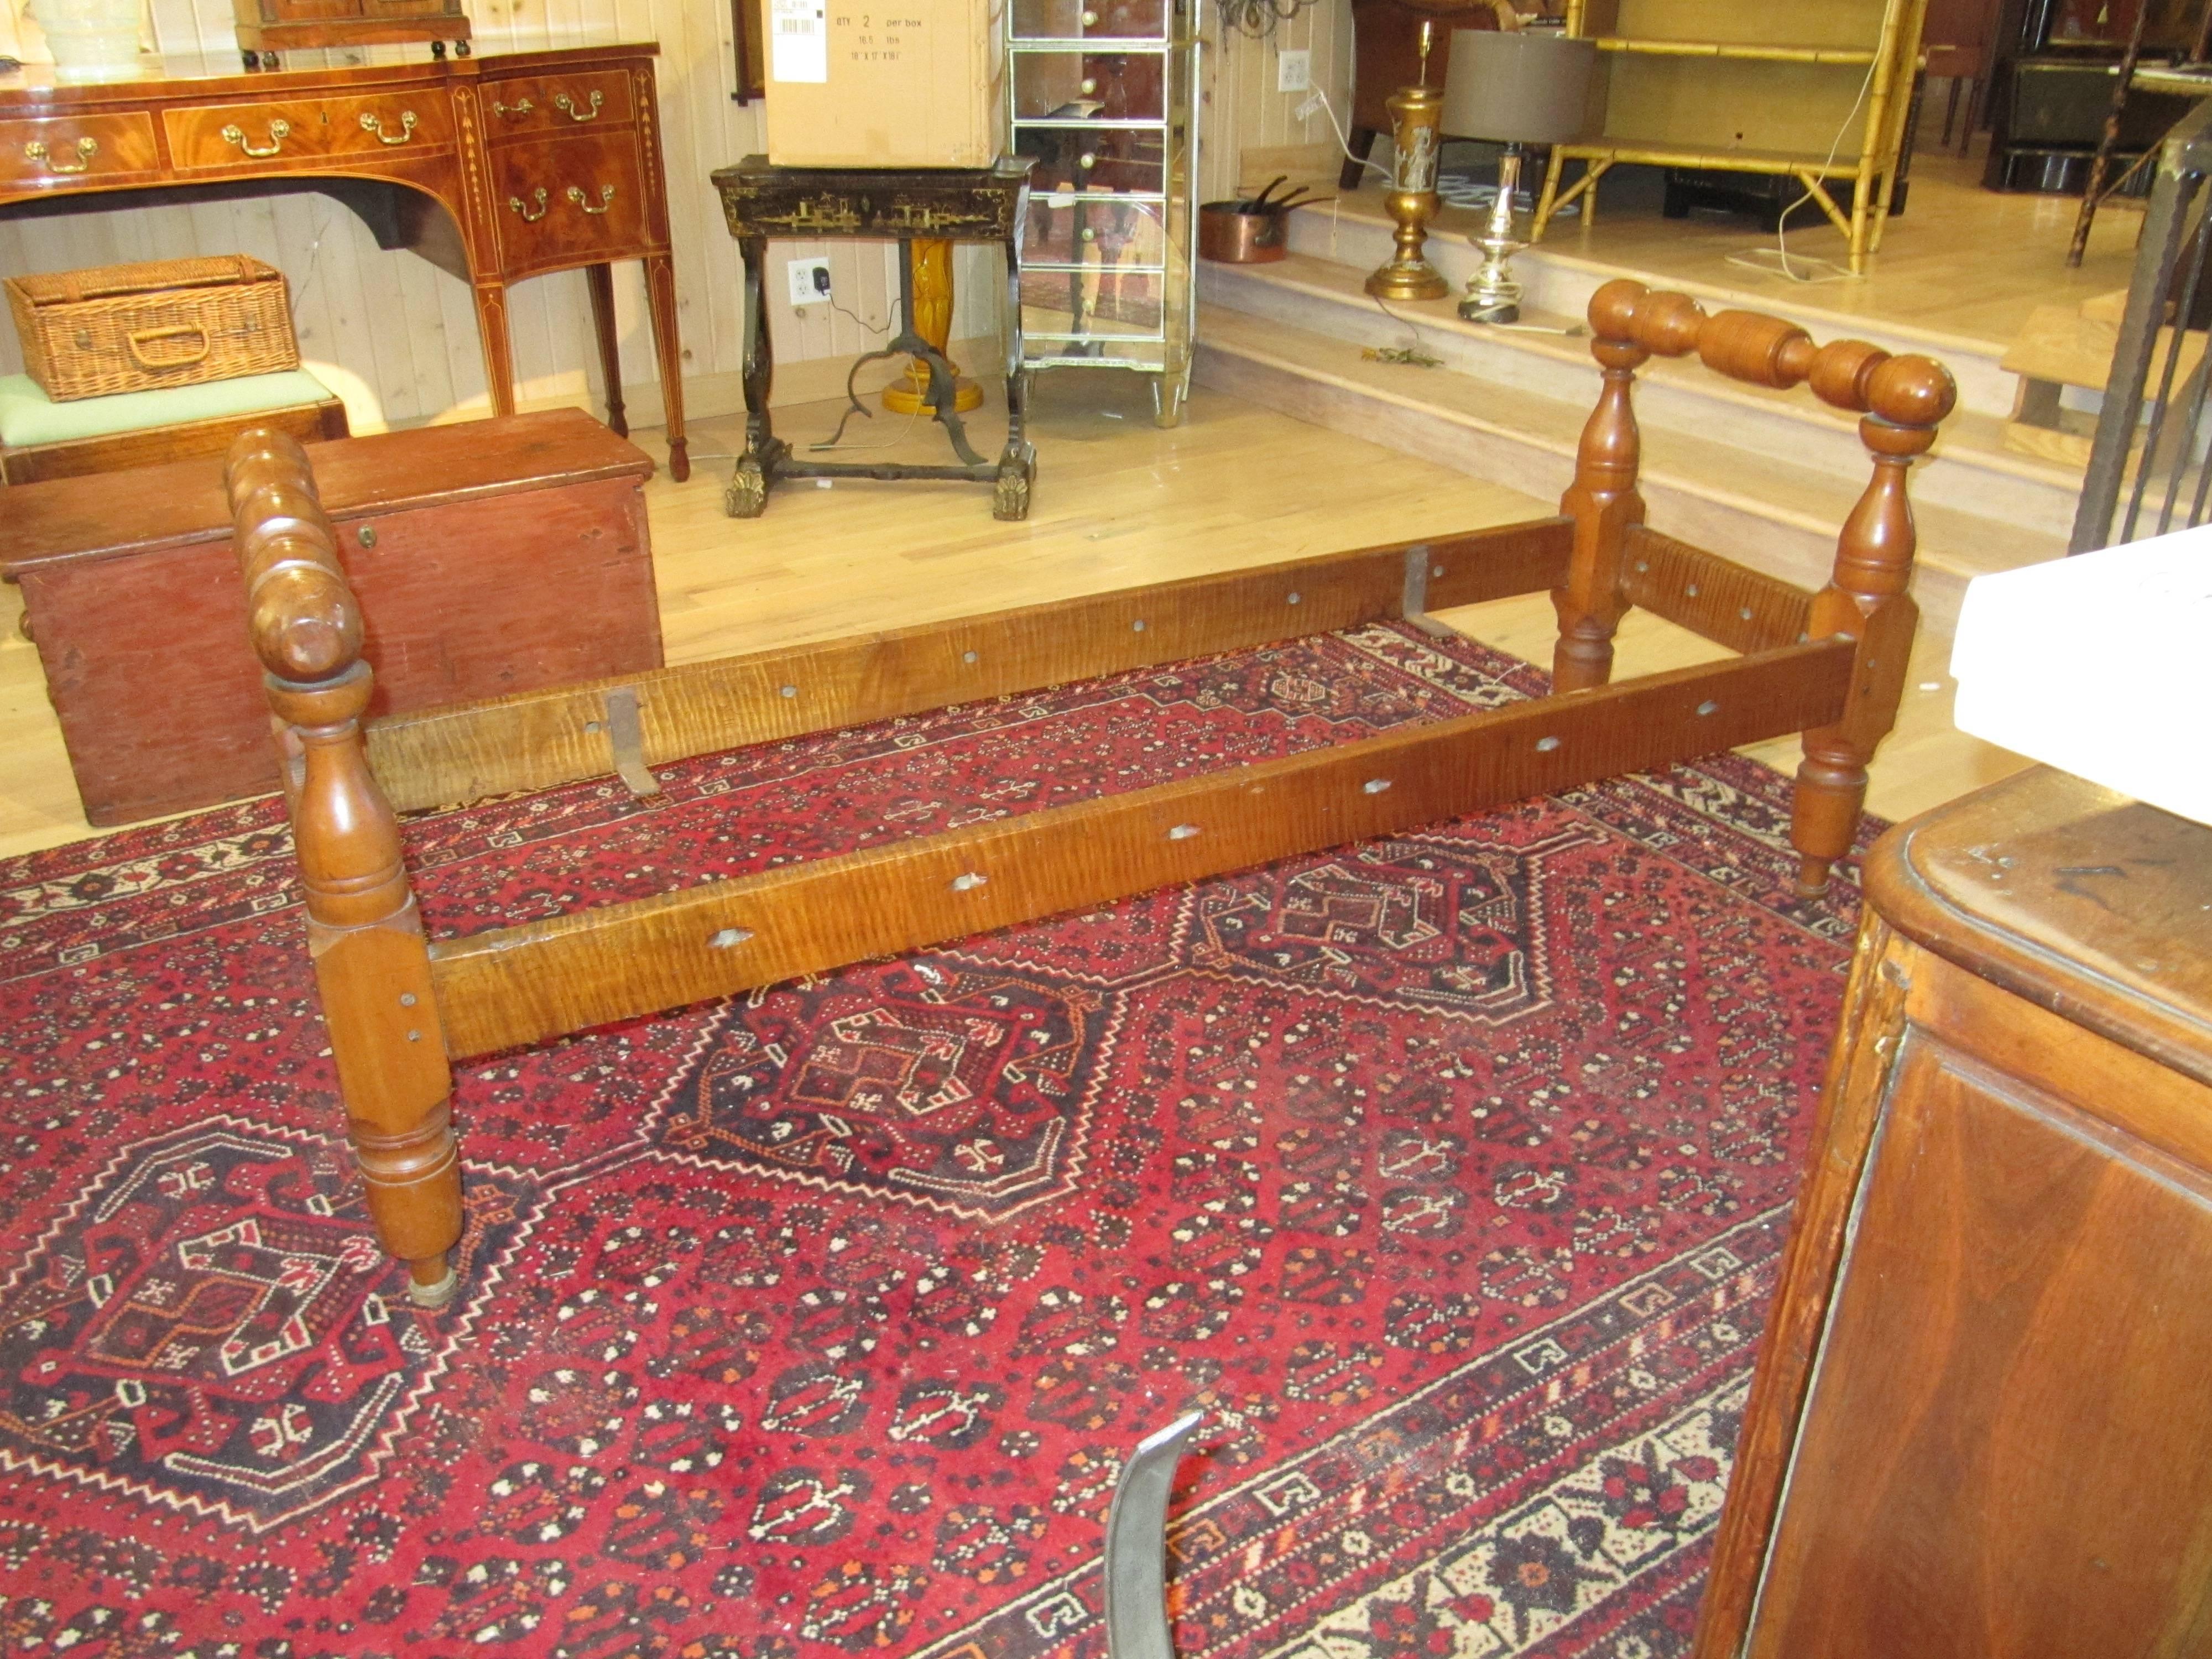 An American Provincial maple daybed 19th century
having a ring turned head and foot board joined by straight side rails.
Width 73 inches. Great piece as a bench at the foot of the bed or hallway.